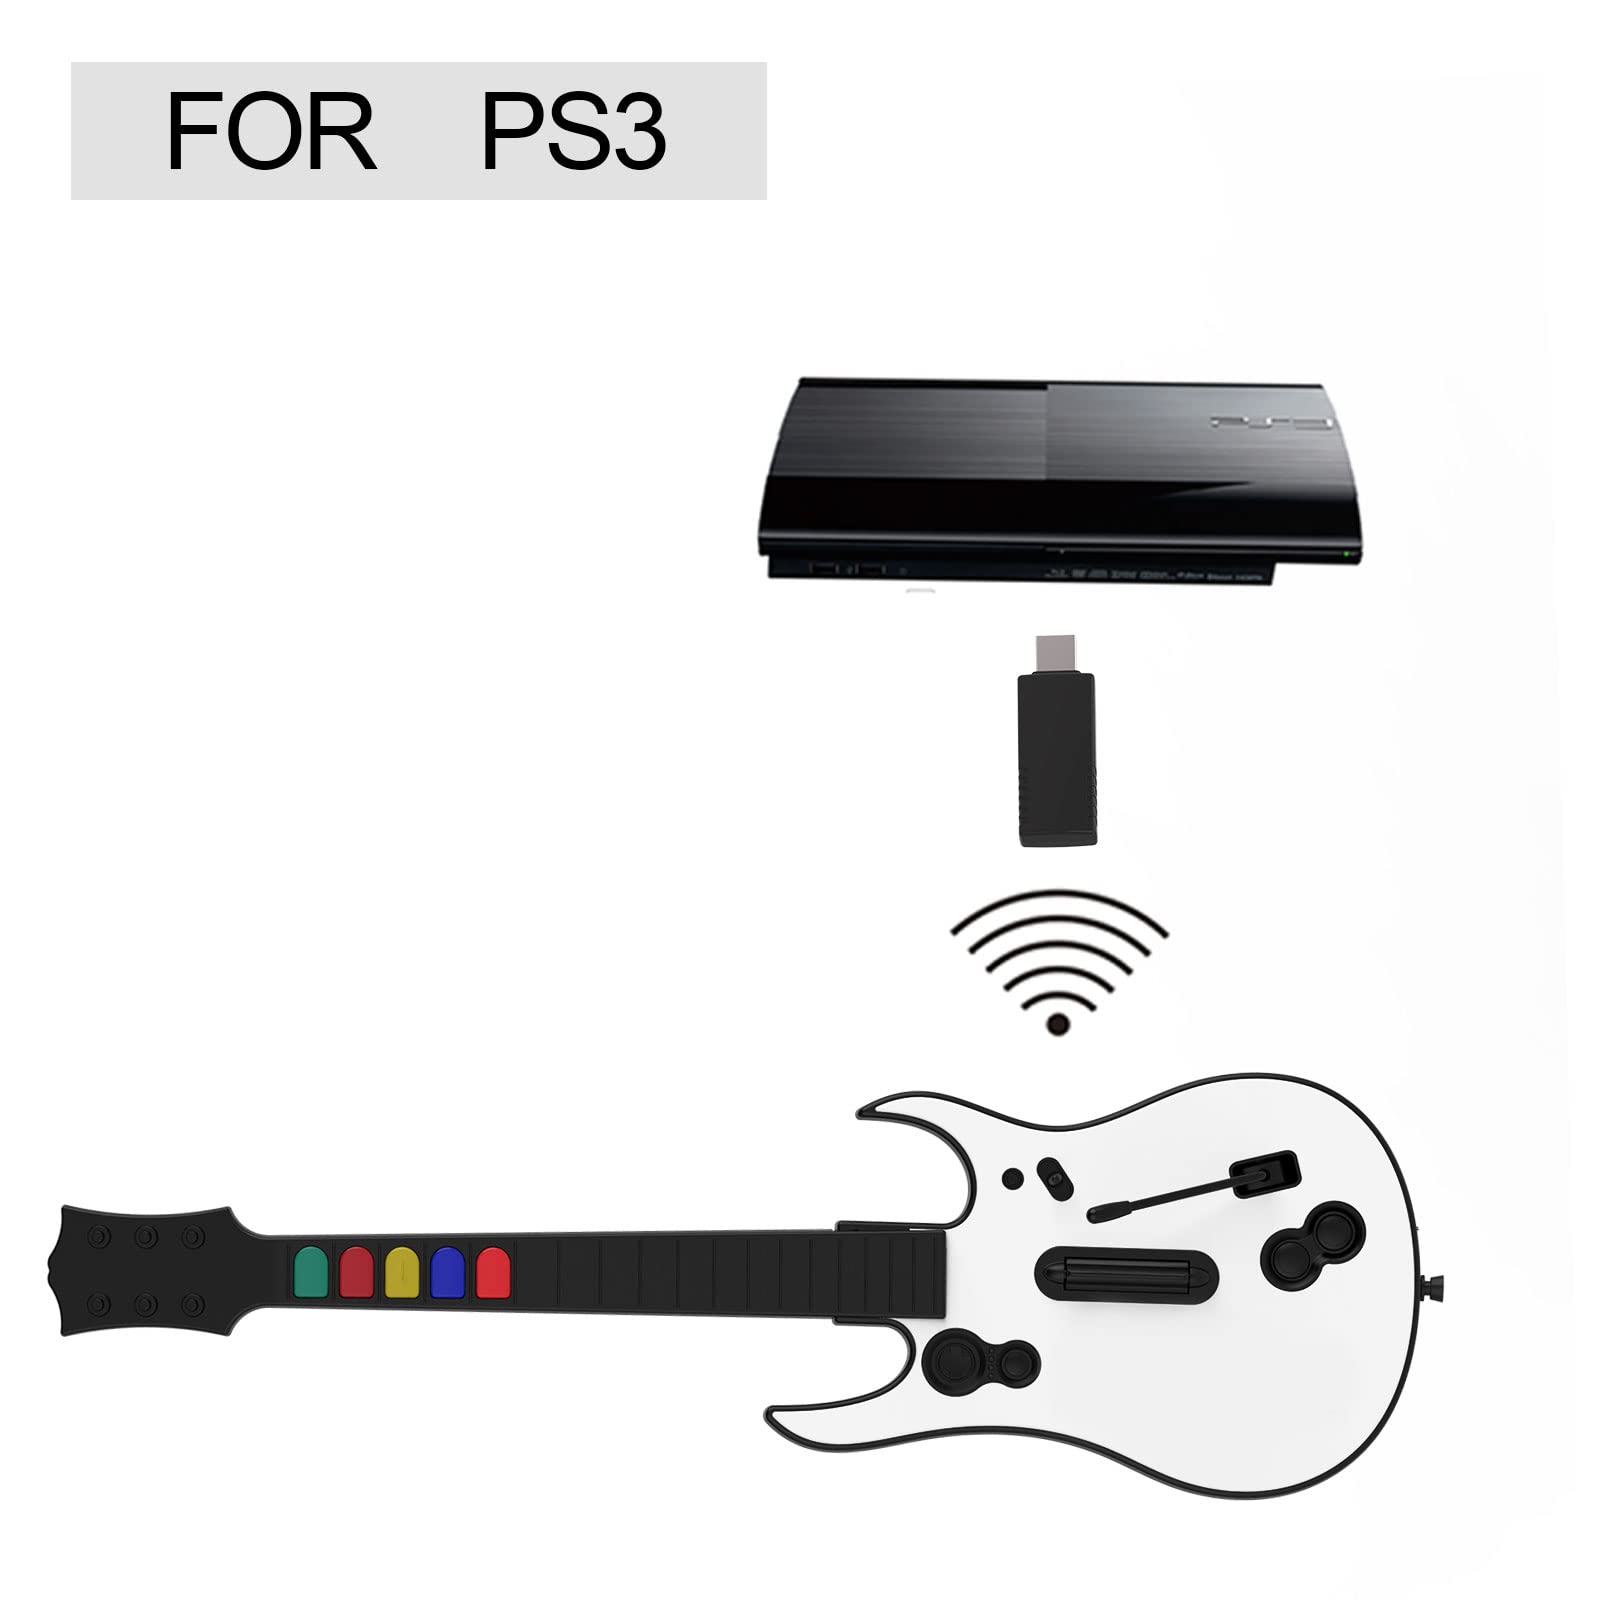 NBCP Guitar Hero Guitar, Wireless PC Guitar Hero Controller for PlayStation 3 PS3 with Dongle for Clone Hero, Rock Band Guitar Hero Games White